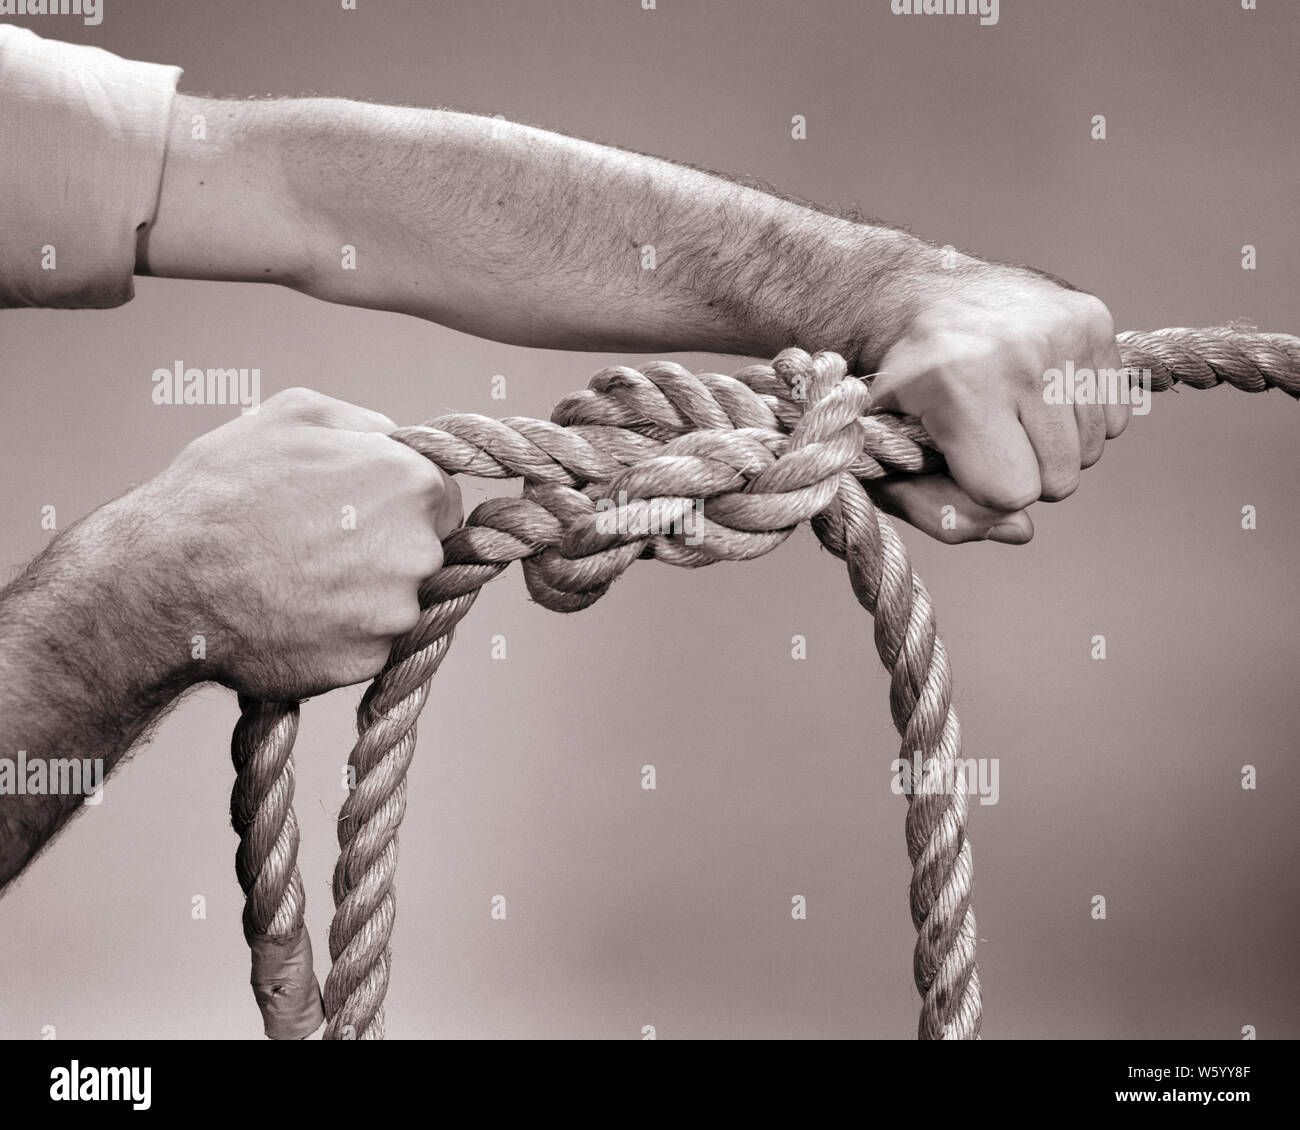 1960s MALE HANDS TYING SQUARE KNOT IN TWO ROPE LINES - s13713